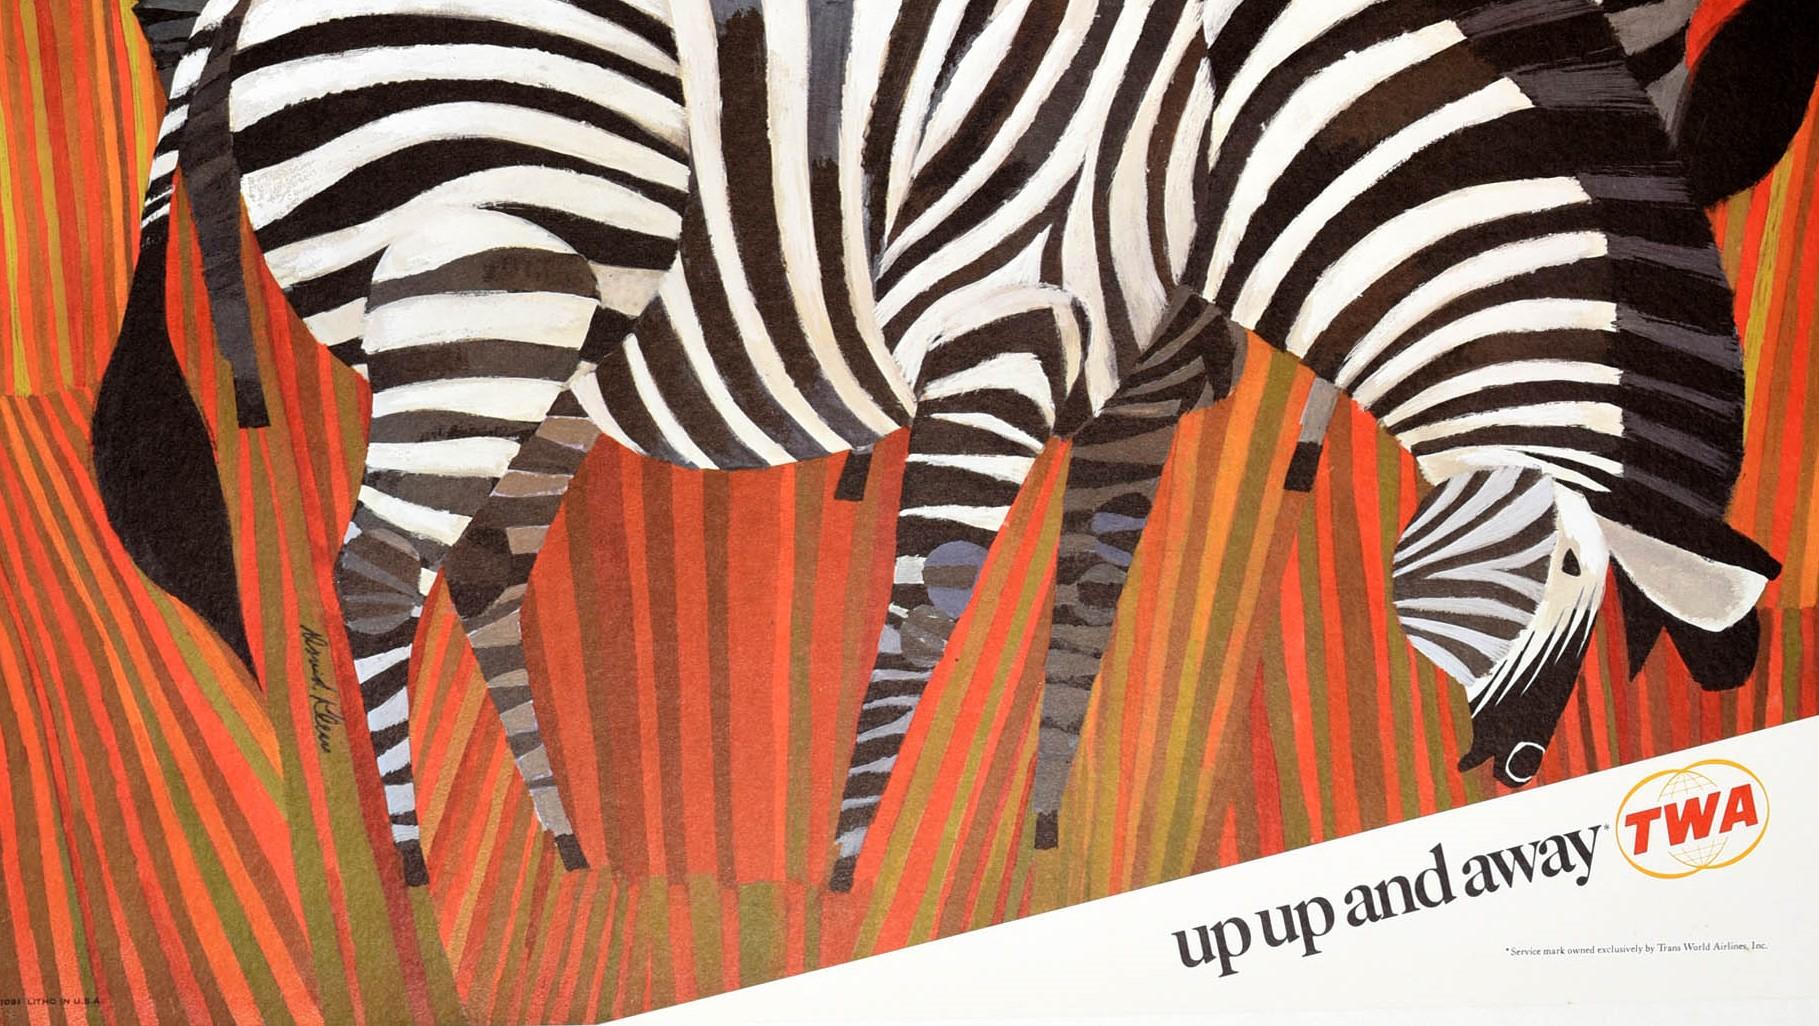 Original vintage mid-century airline travel poster for Africa Fly TWA Trans World Airlines up up and away TWA featuring a colourful iconic design by the notable American artist David Klein (1918-2005) of black and white zebras against a striped